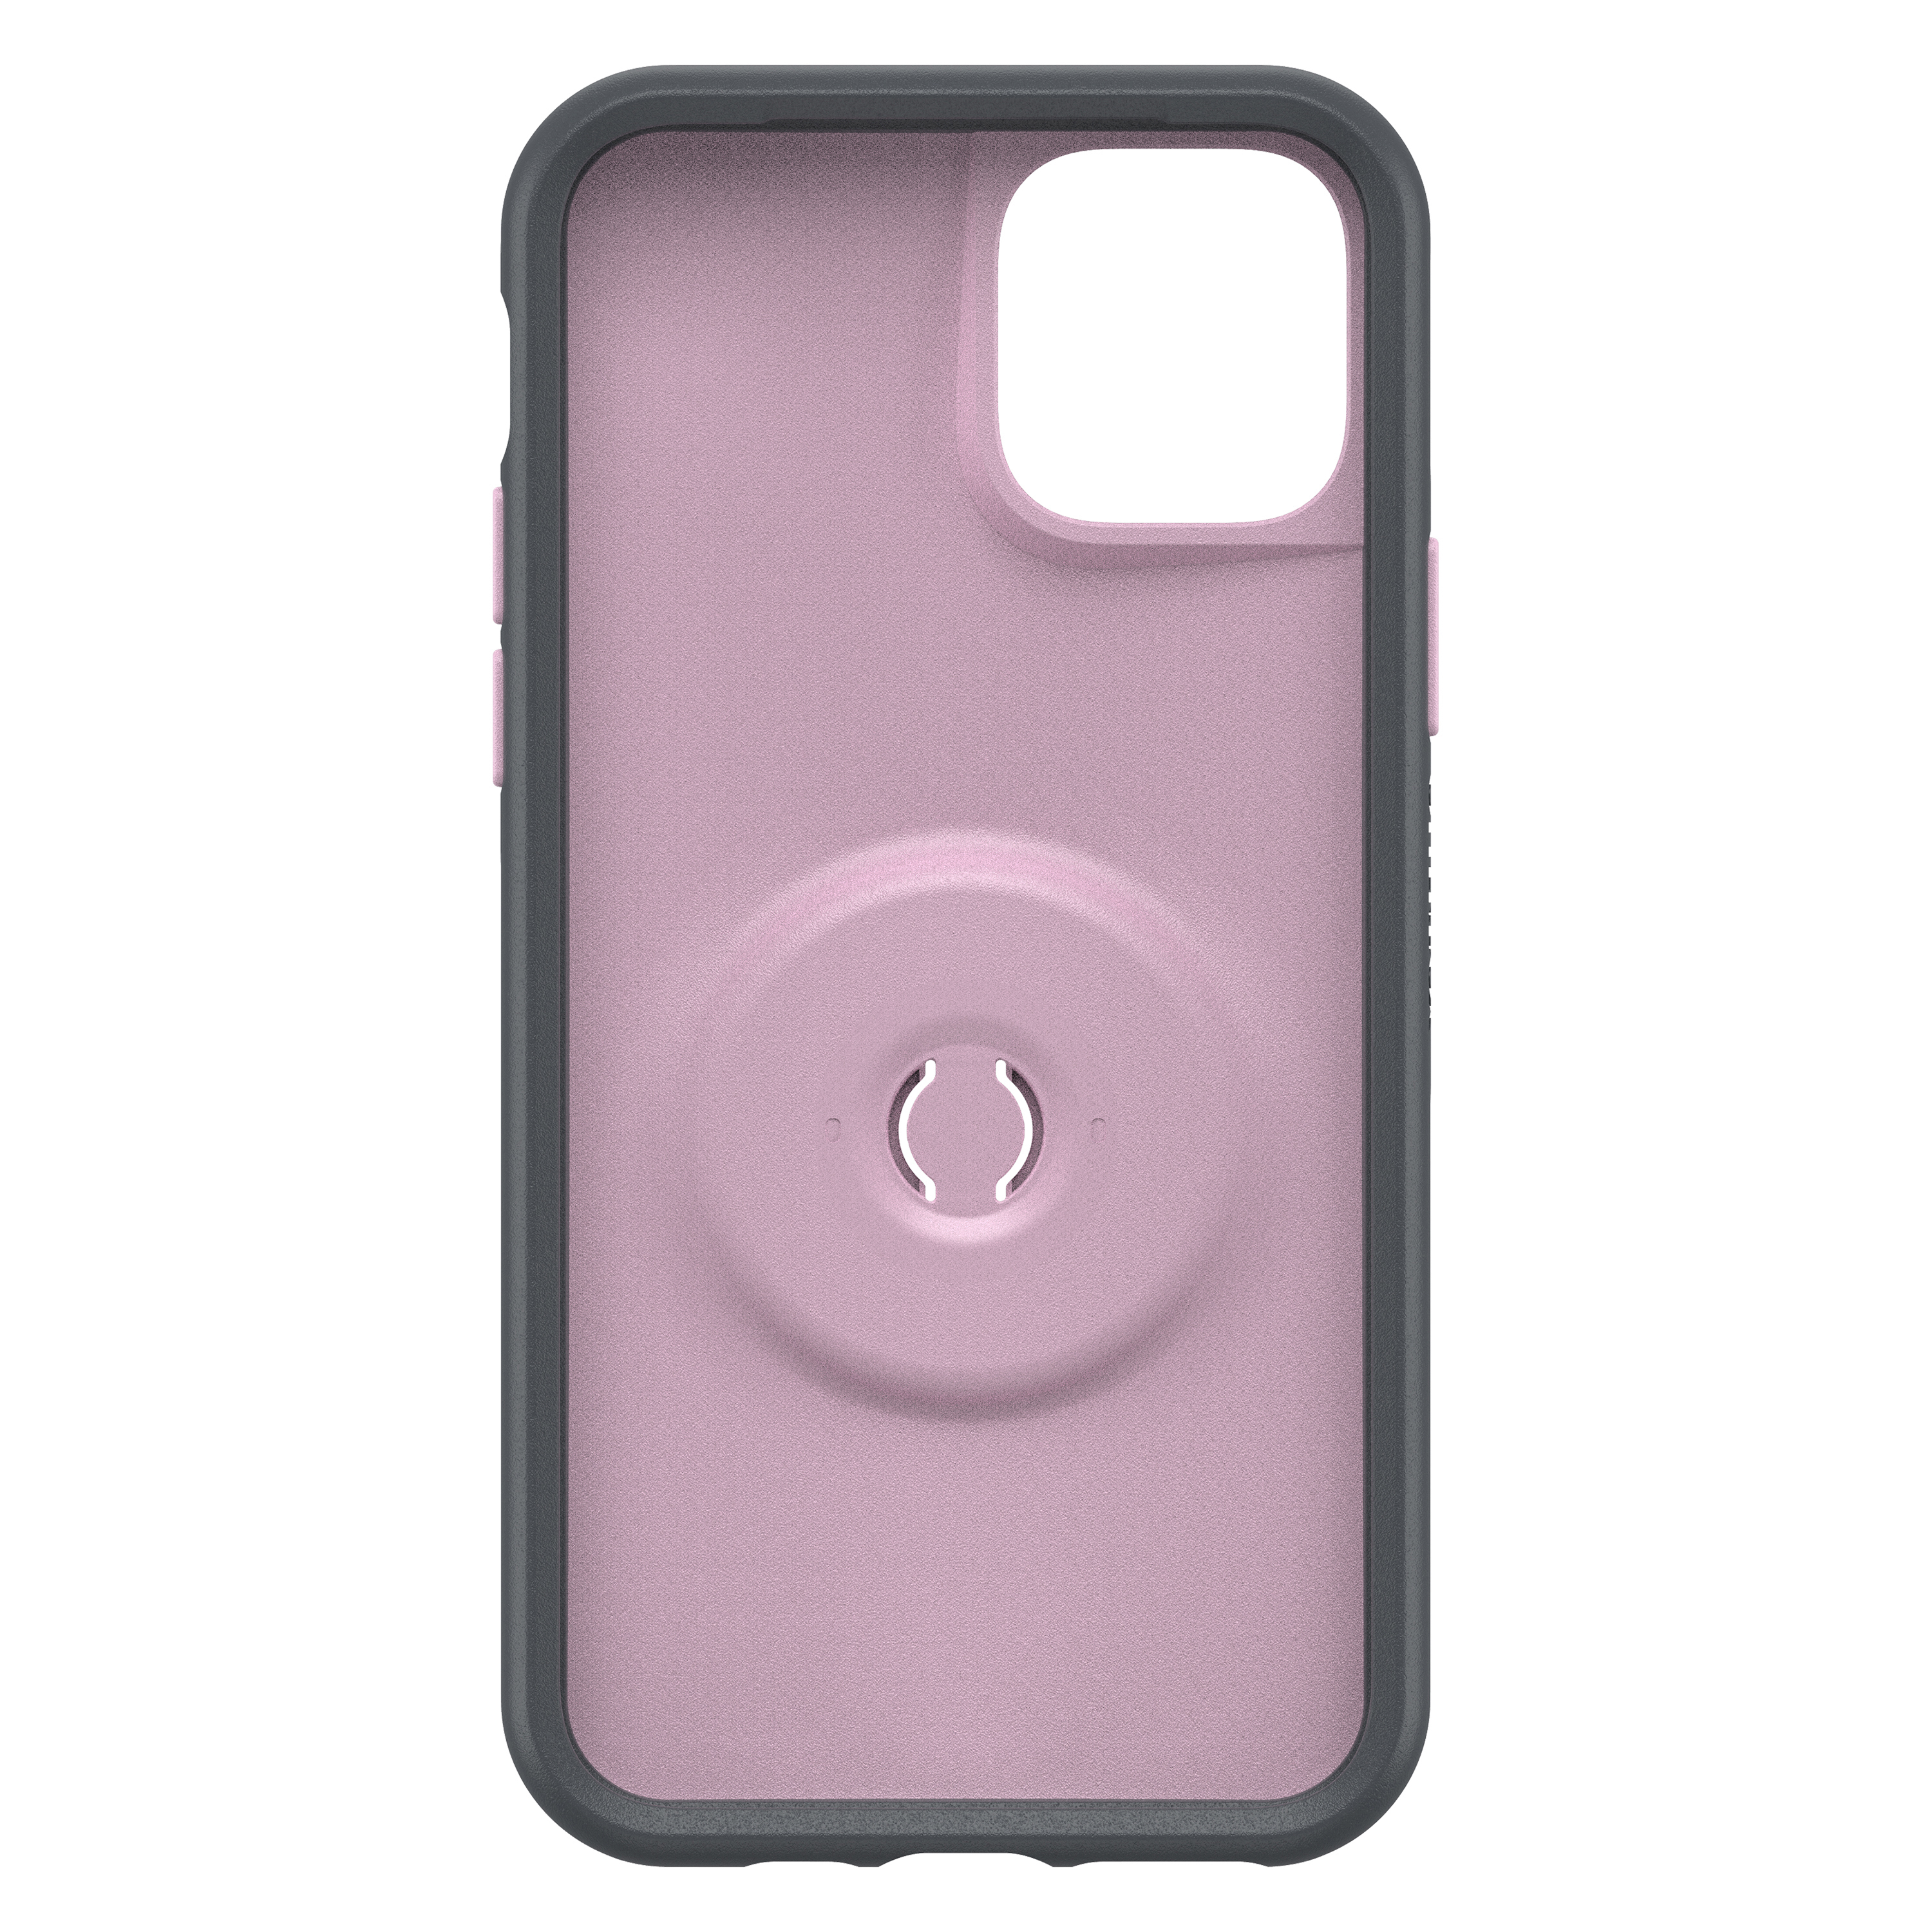 iPhone 11 Backcover, Pro, Symmetry, Apple, Rosa OTTERBOX